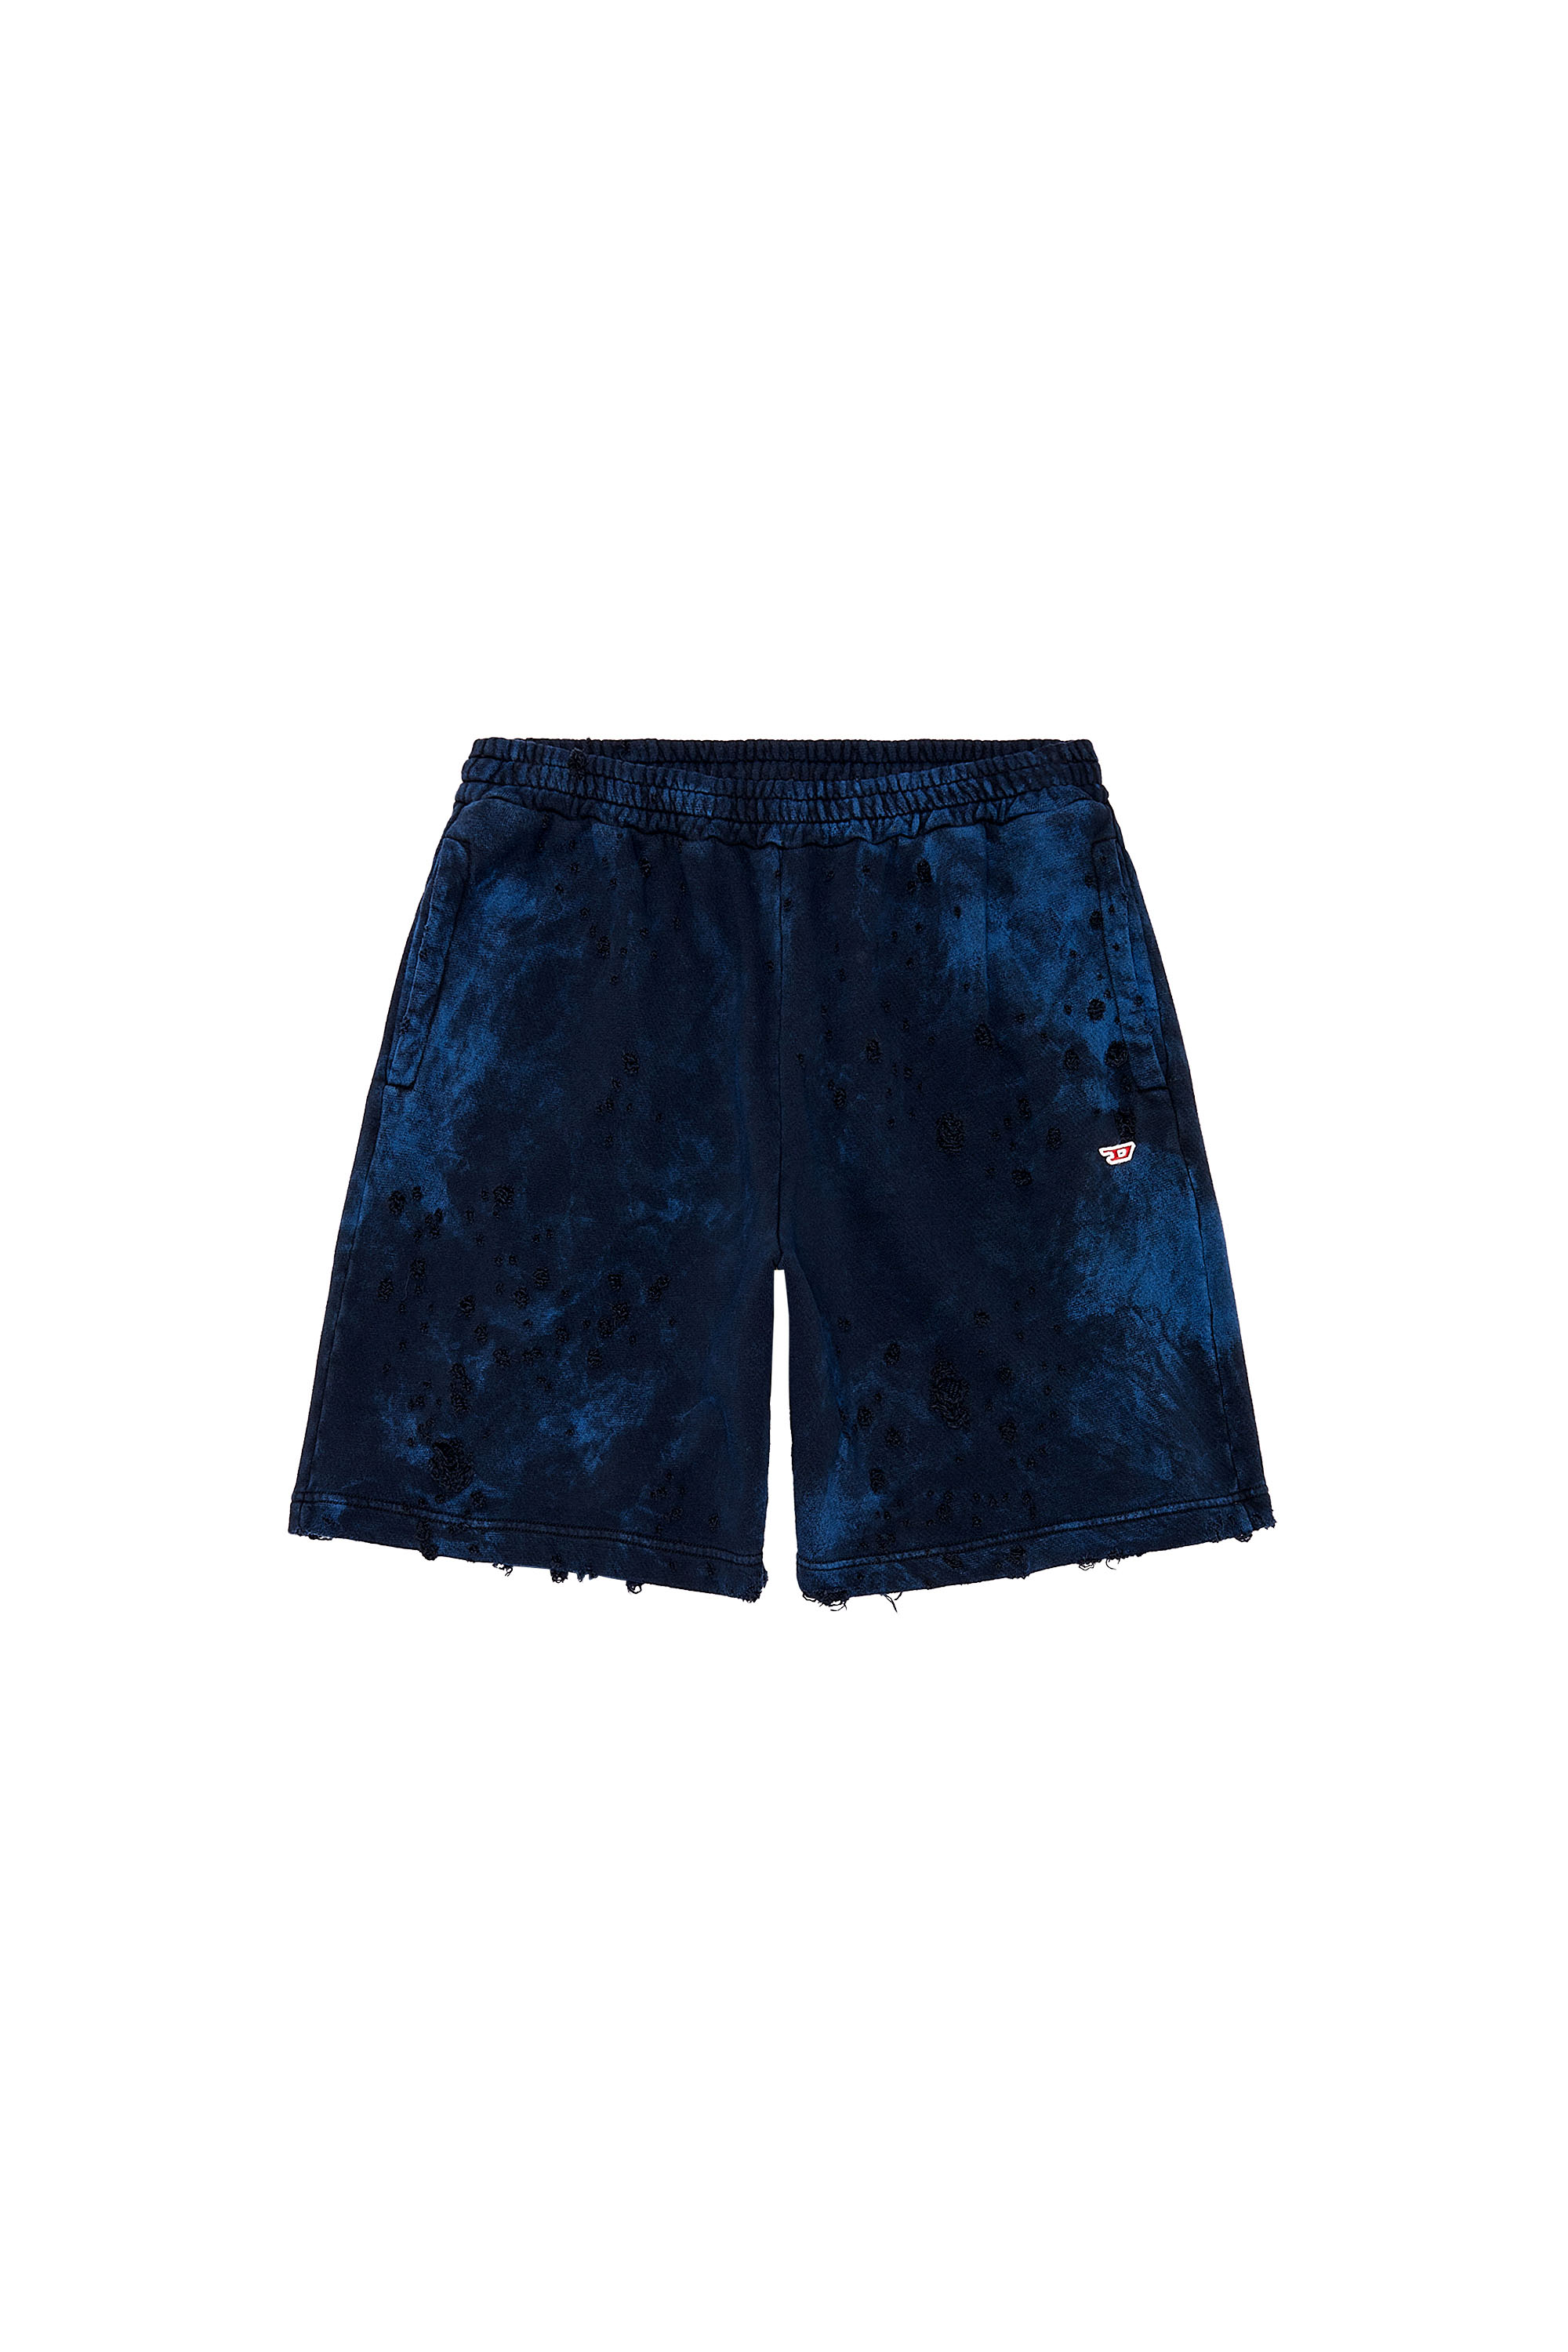 Diesel - P-CROWN-N2, Man Distressed shorts with marbled effect in Blue - Image 3